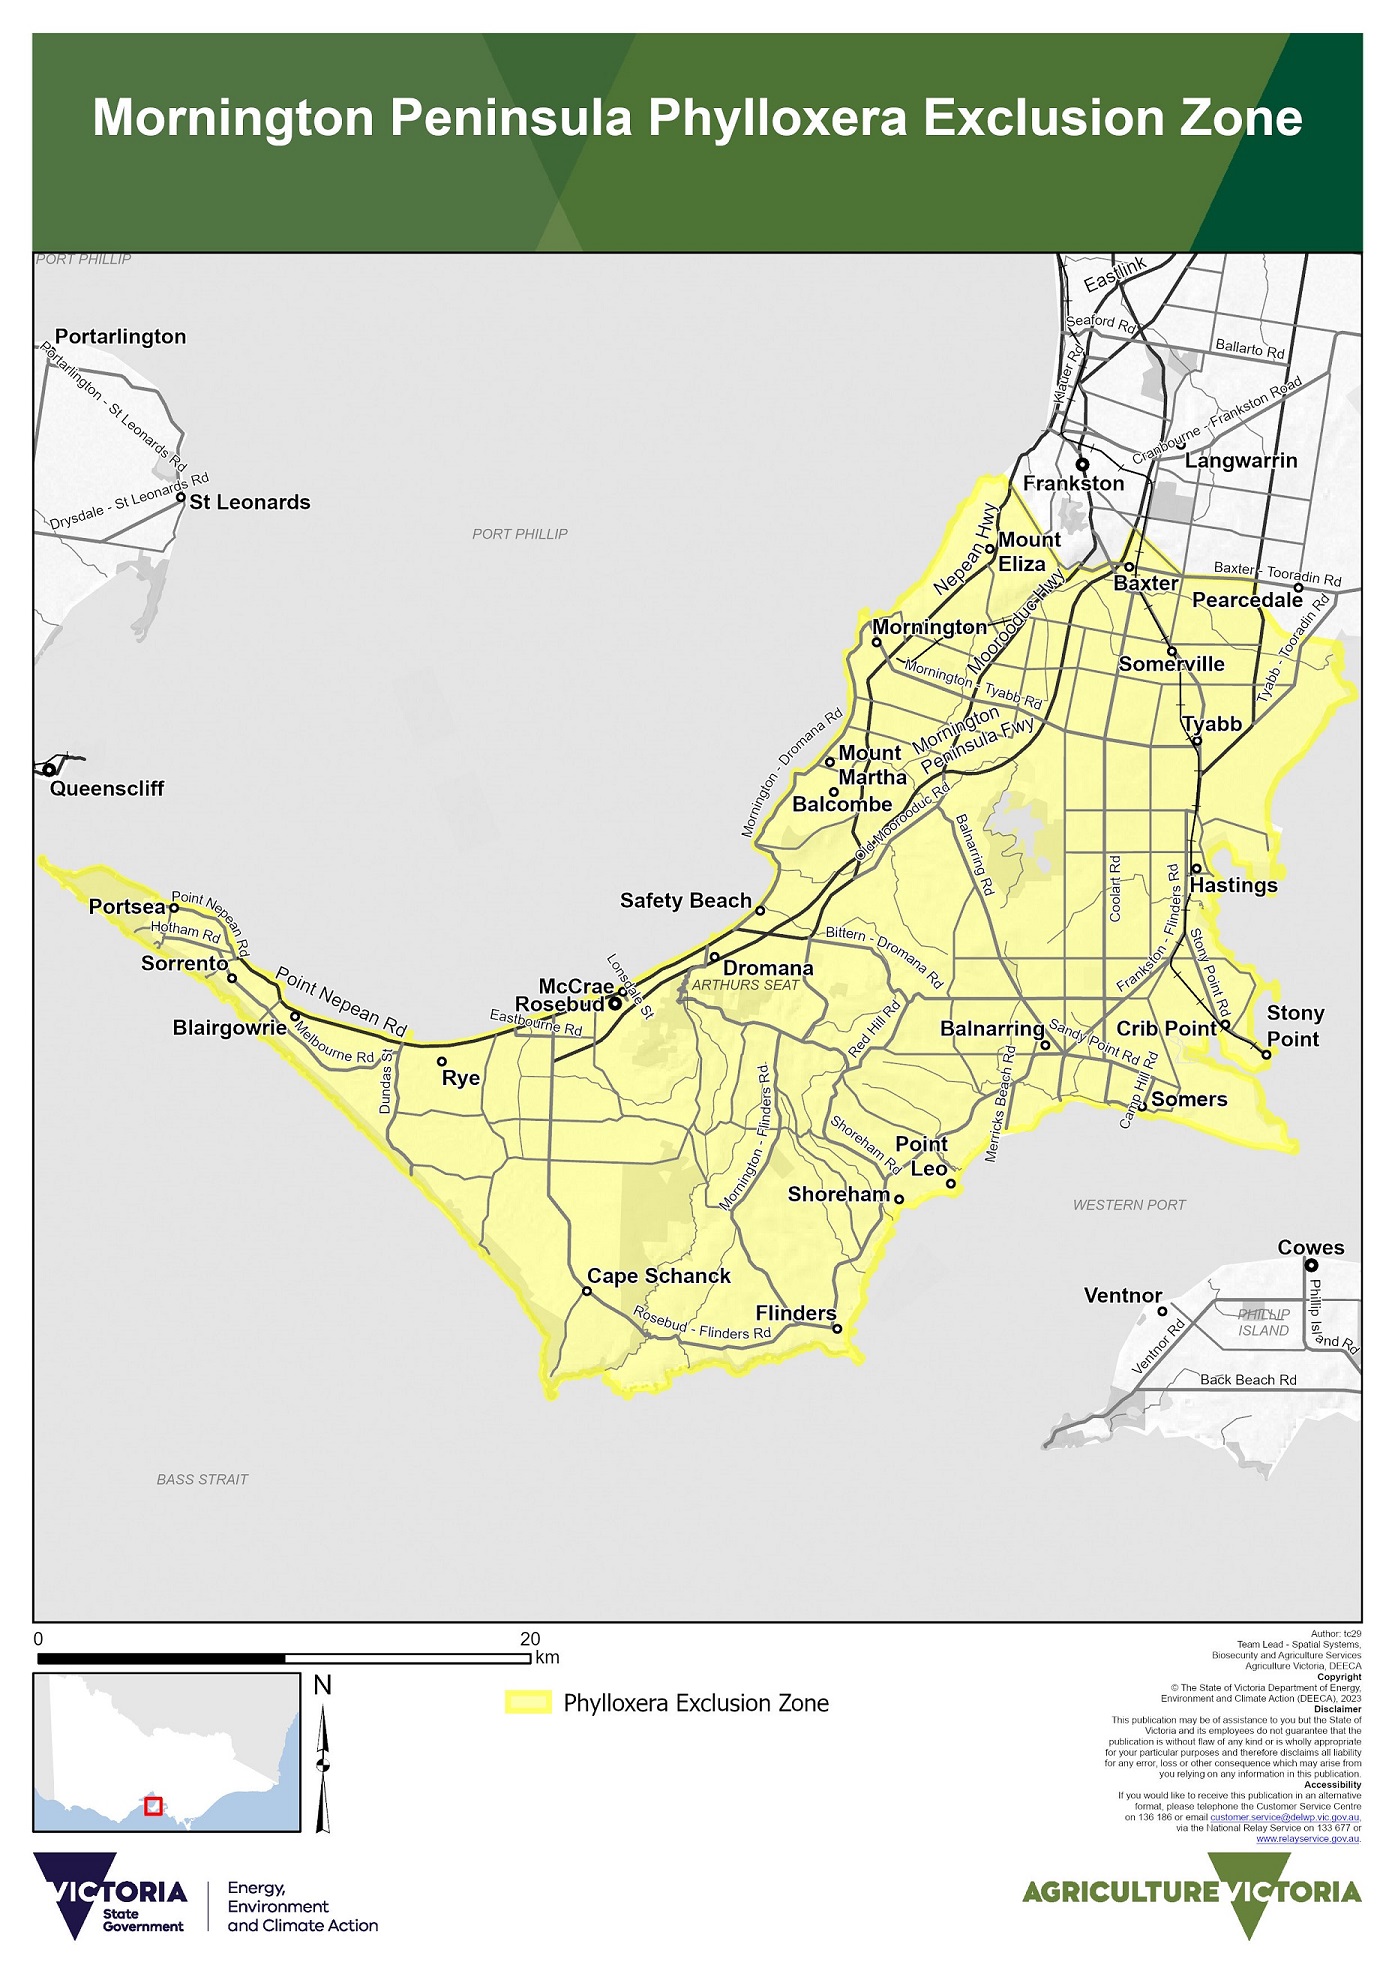 Mornington Peninsula Phylloxera Exclusion Zone - October 2021. The webpage lists the towns this includes